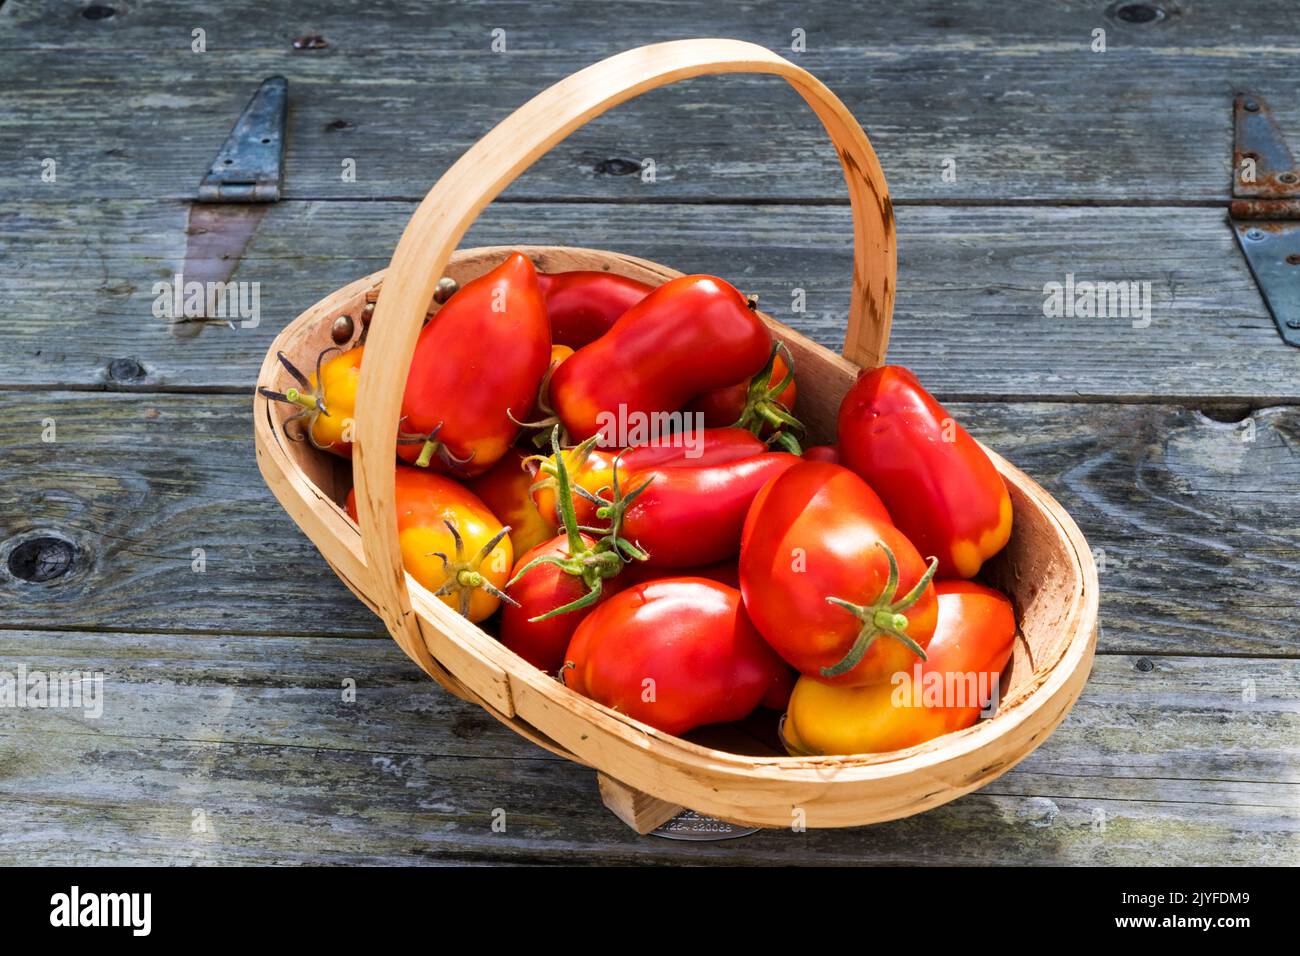 A trug full of freshly-picked, home-grown San Marzano tomatoes, Solanum lycopersicum. Stock Photo